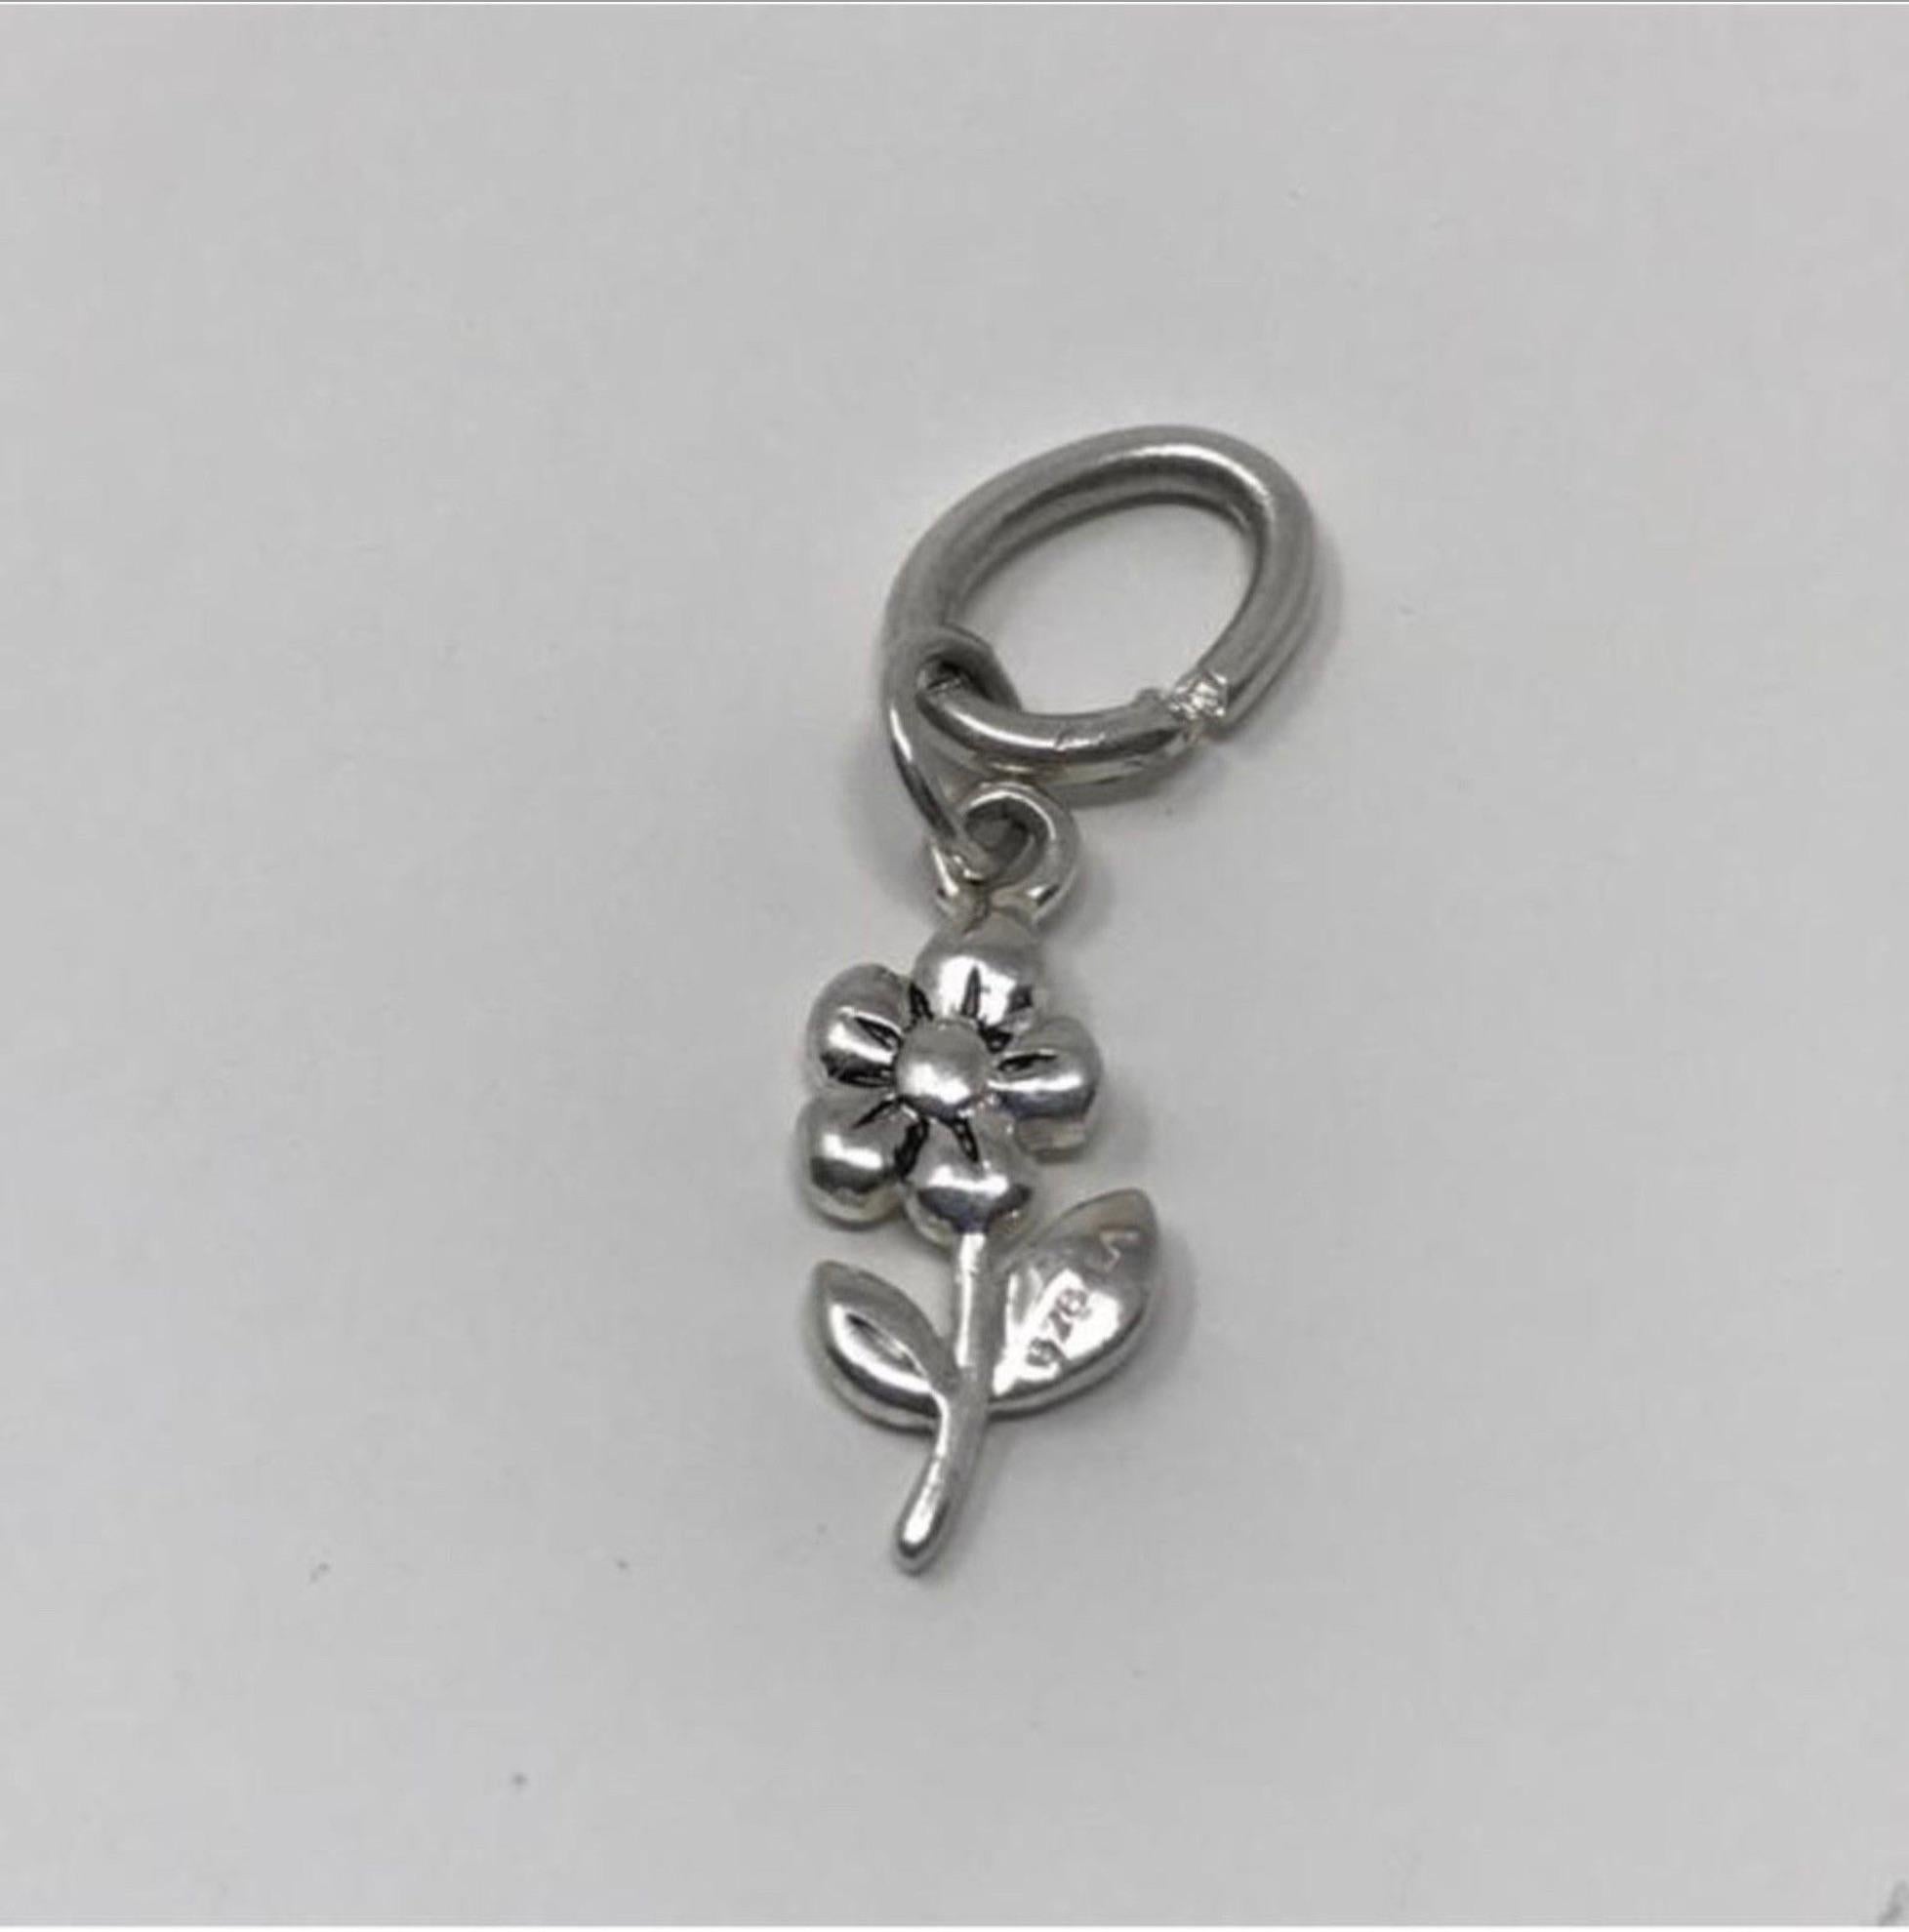 Model - Vintage Sterling Silver Puffy Flower Charm/Pendant

Condition - Exceptional

SKU - 1044-11

Original Retail - $25.00

Dimensions - .75 x .25 x .2

Closure Type - Not Applicable

Material - Sterling Silver

Comes with - No Additional